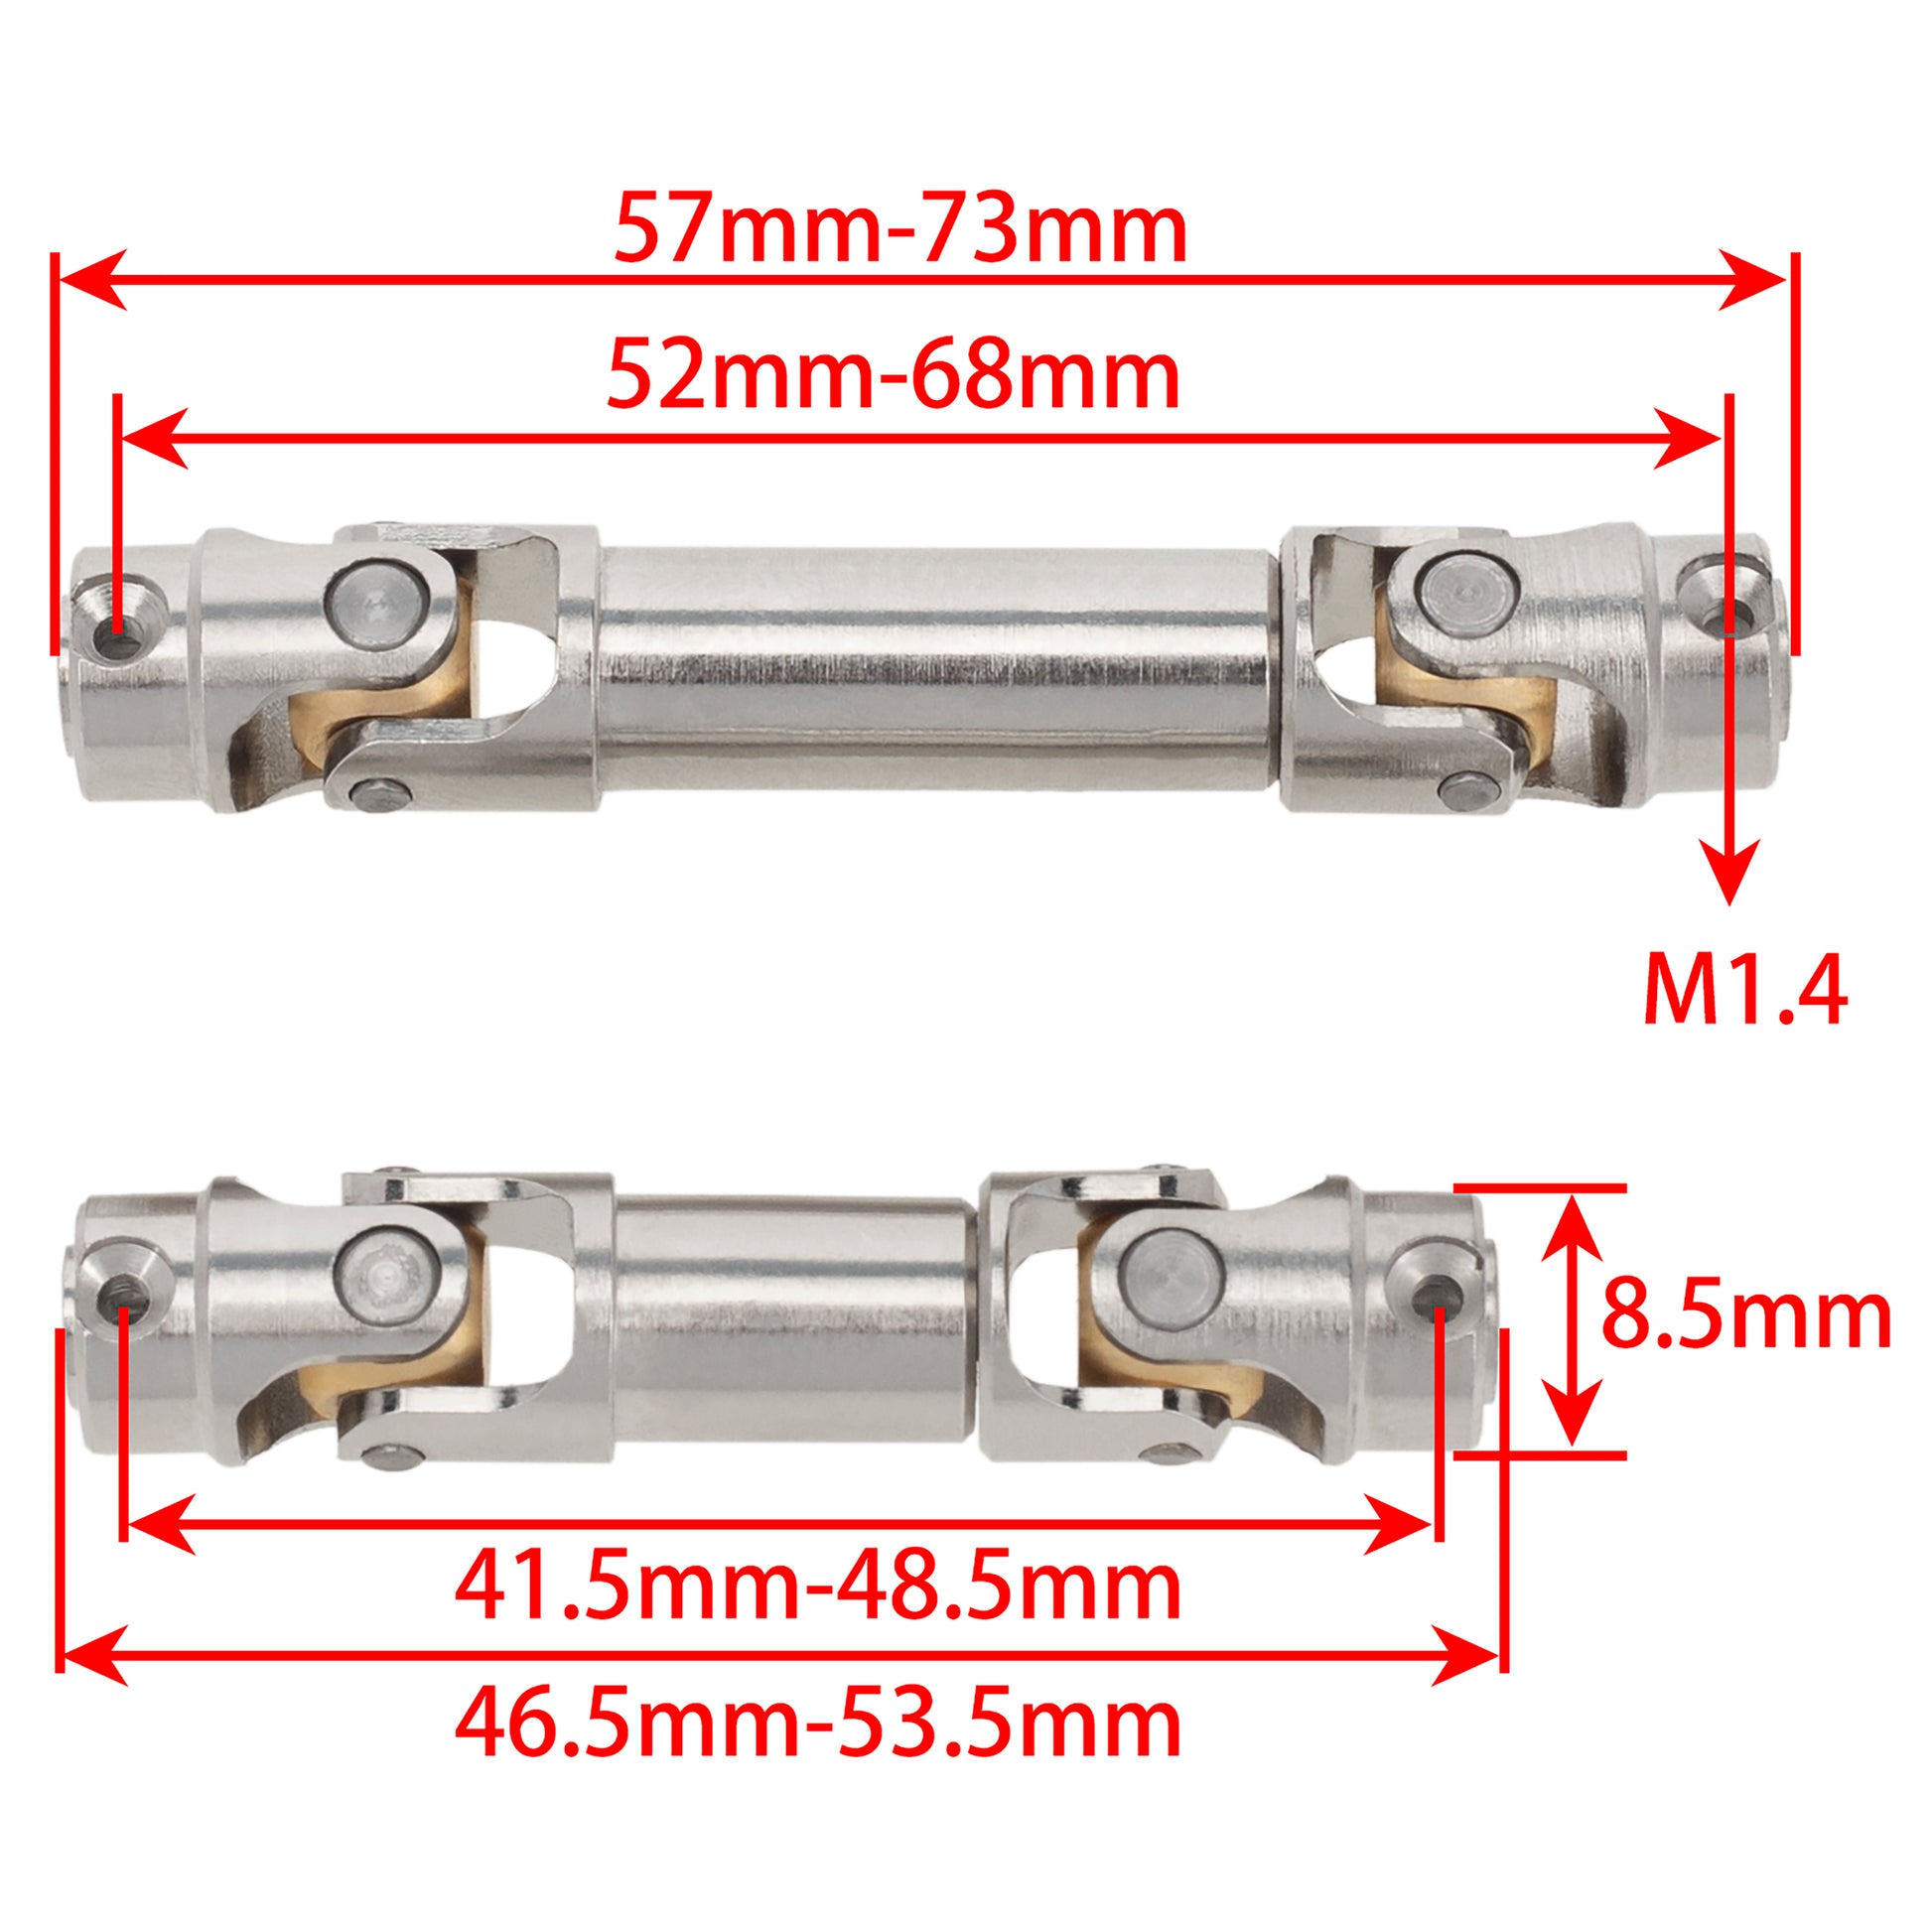 Steel Heavy-duty Drive Shaft V2 Size for TRX4M